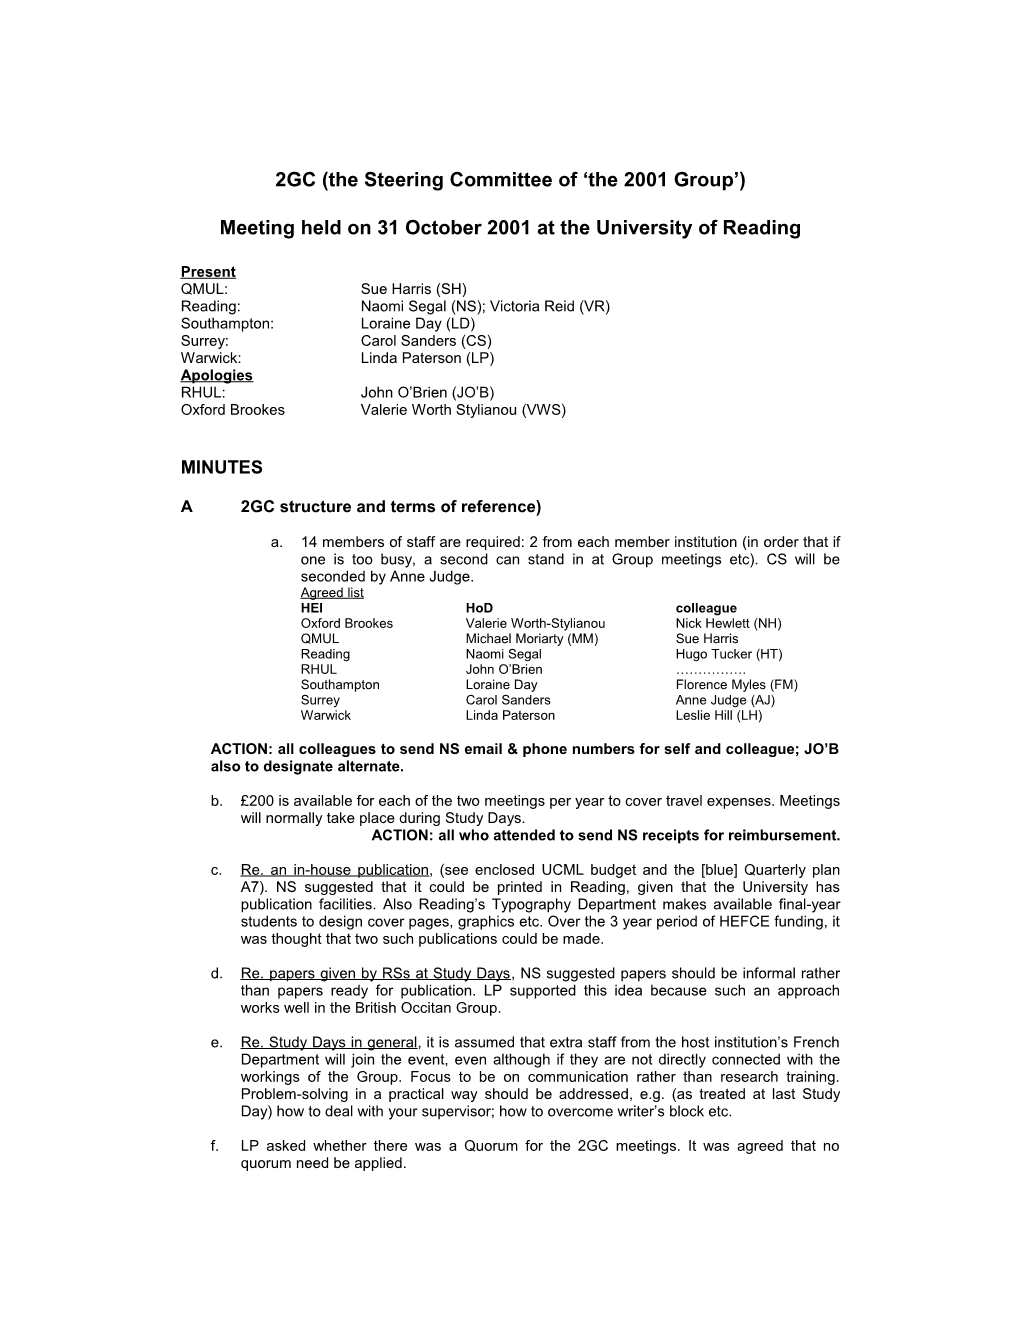 2GC (The Steering Committee of the 2001 Group )